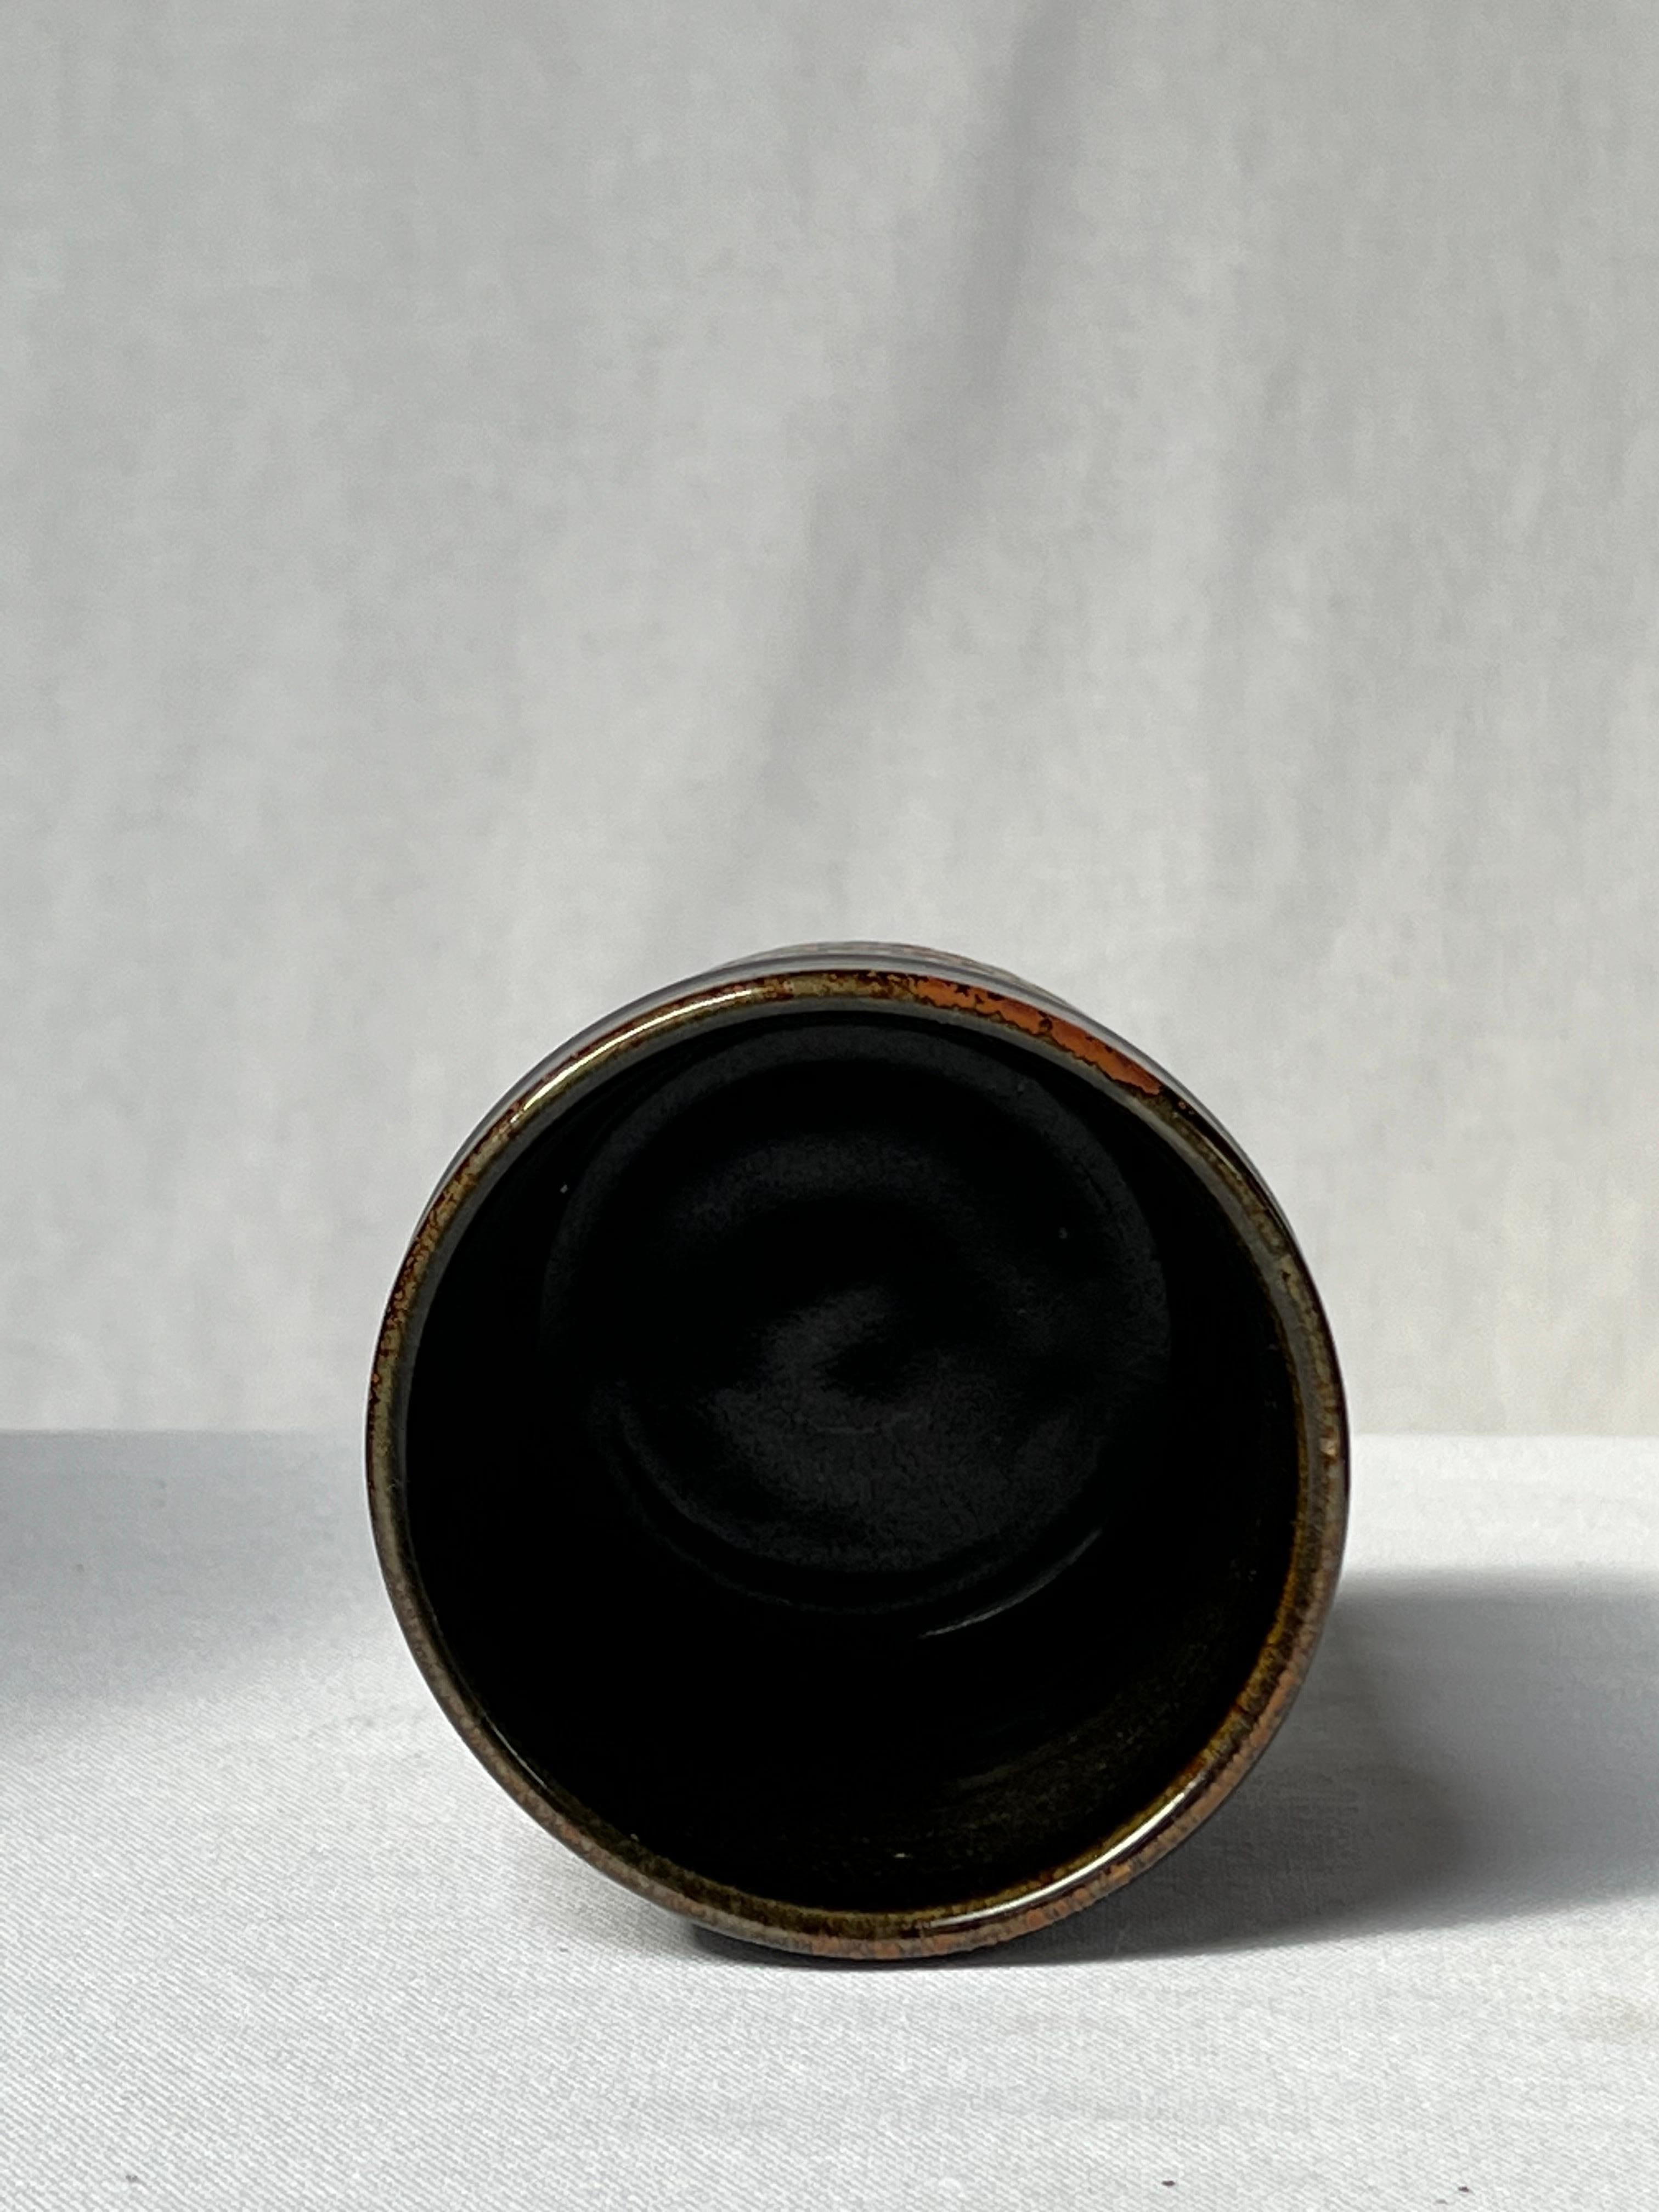 Stig Lindberg Unique Vase in black Glaze Tenmoku Made by Hand Sweden 1968 In Excellent Condition For Sale In Forest, BE